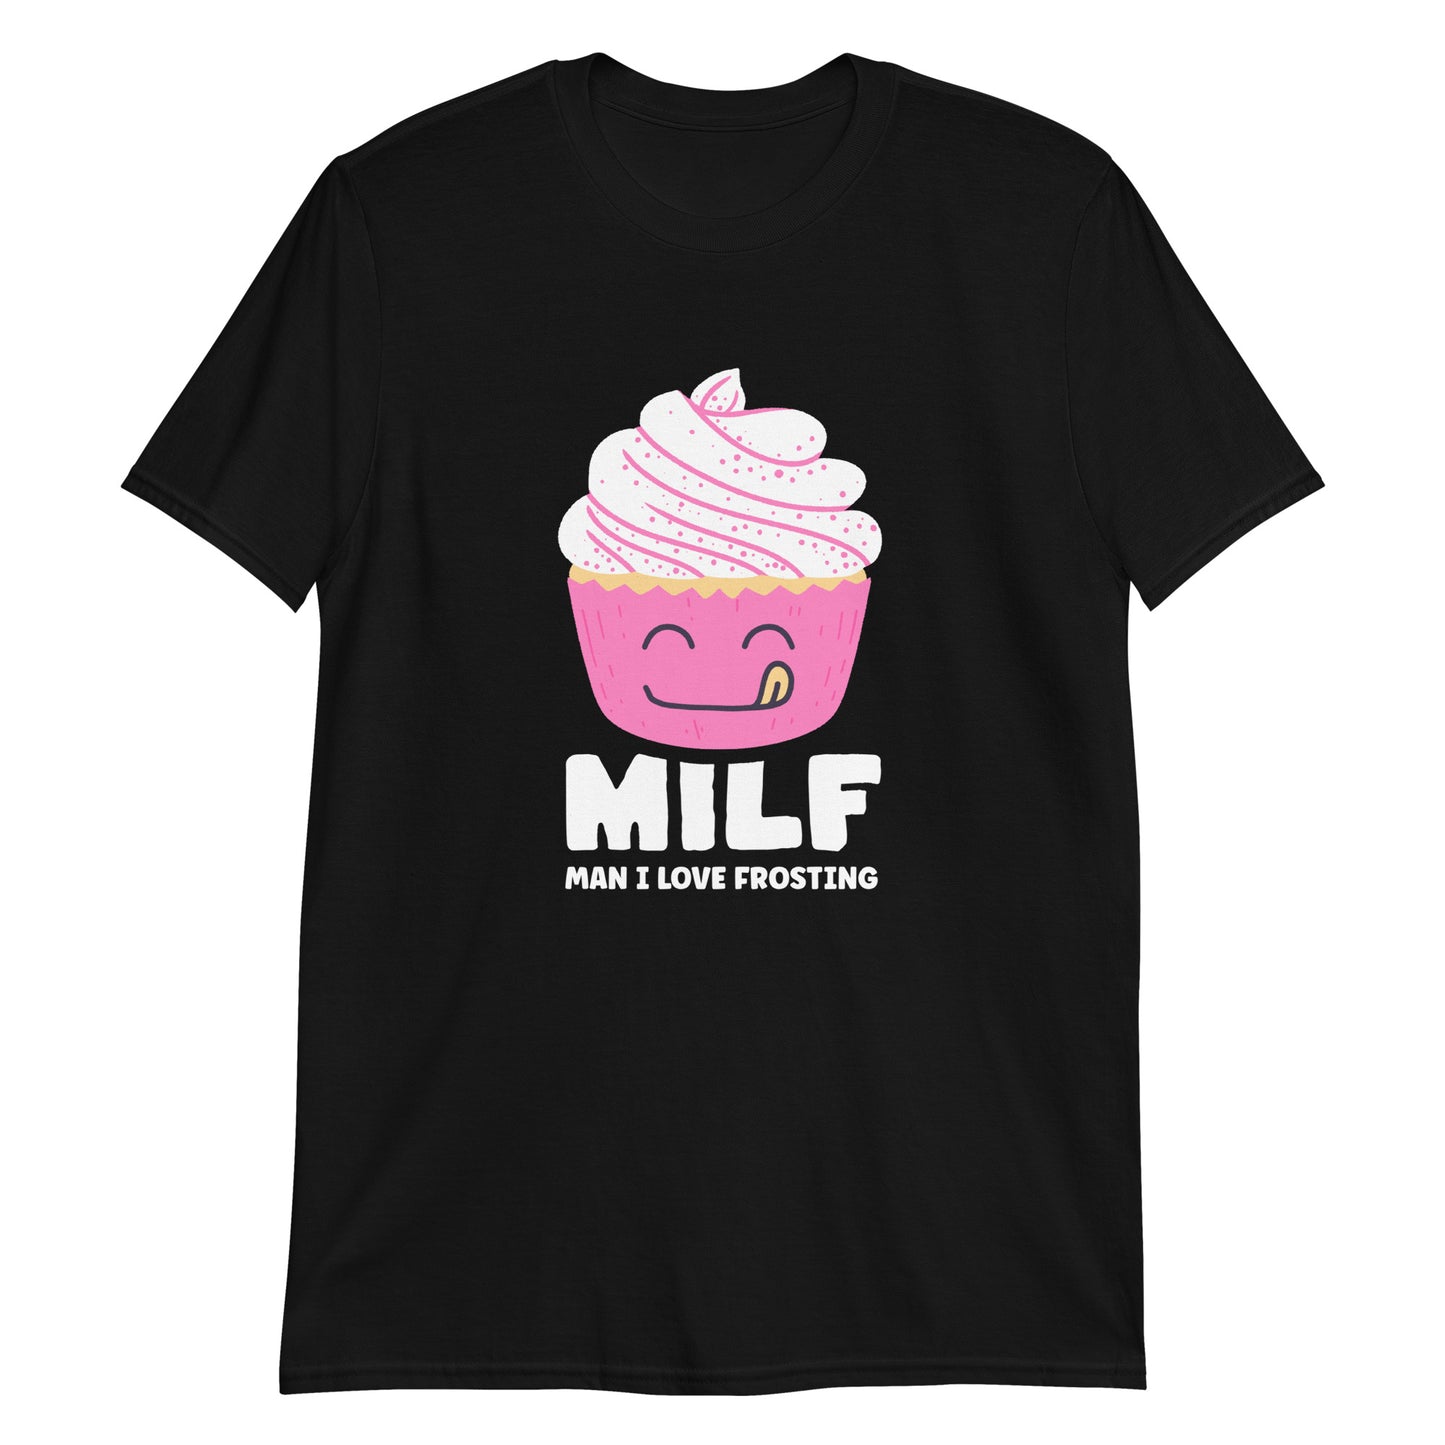 MILF - Man I Love Frosting T-Shirt for People who love cupcakes